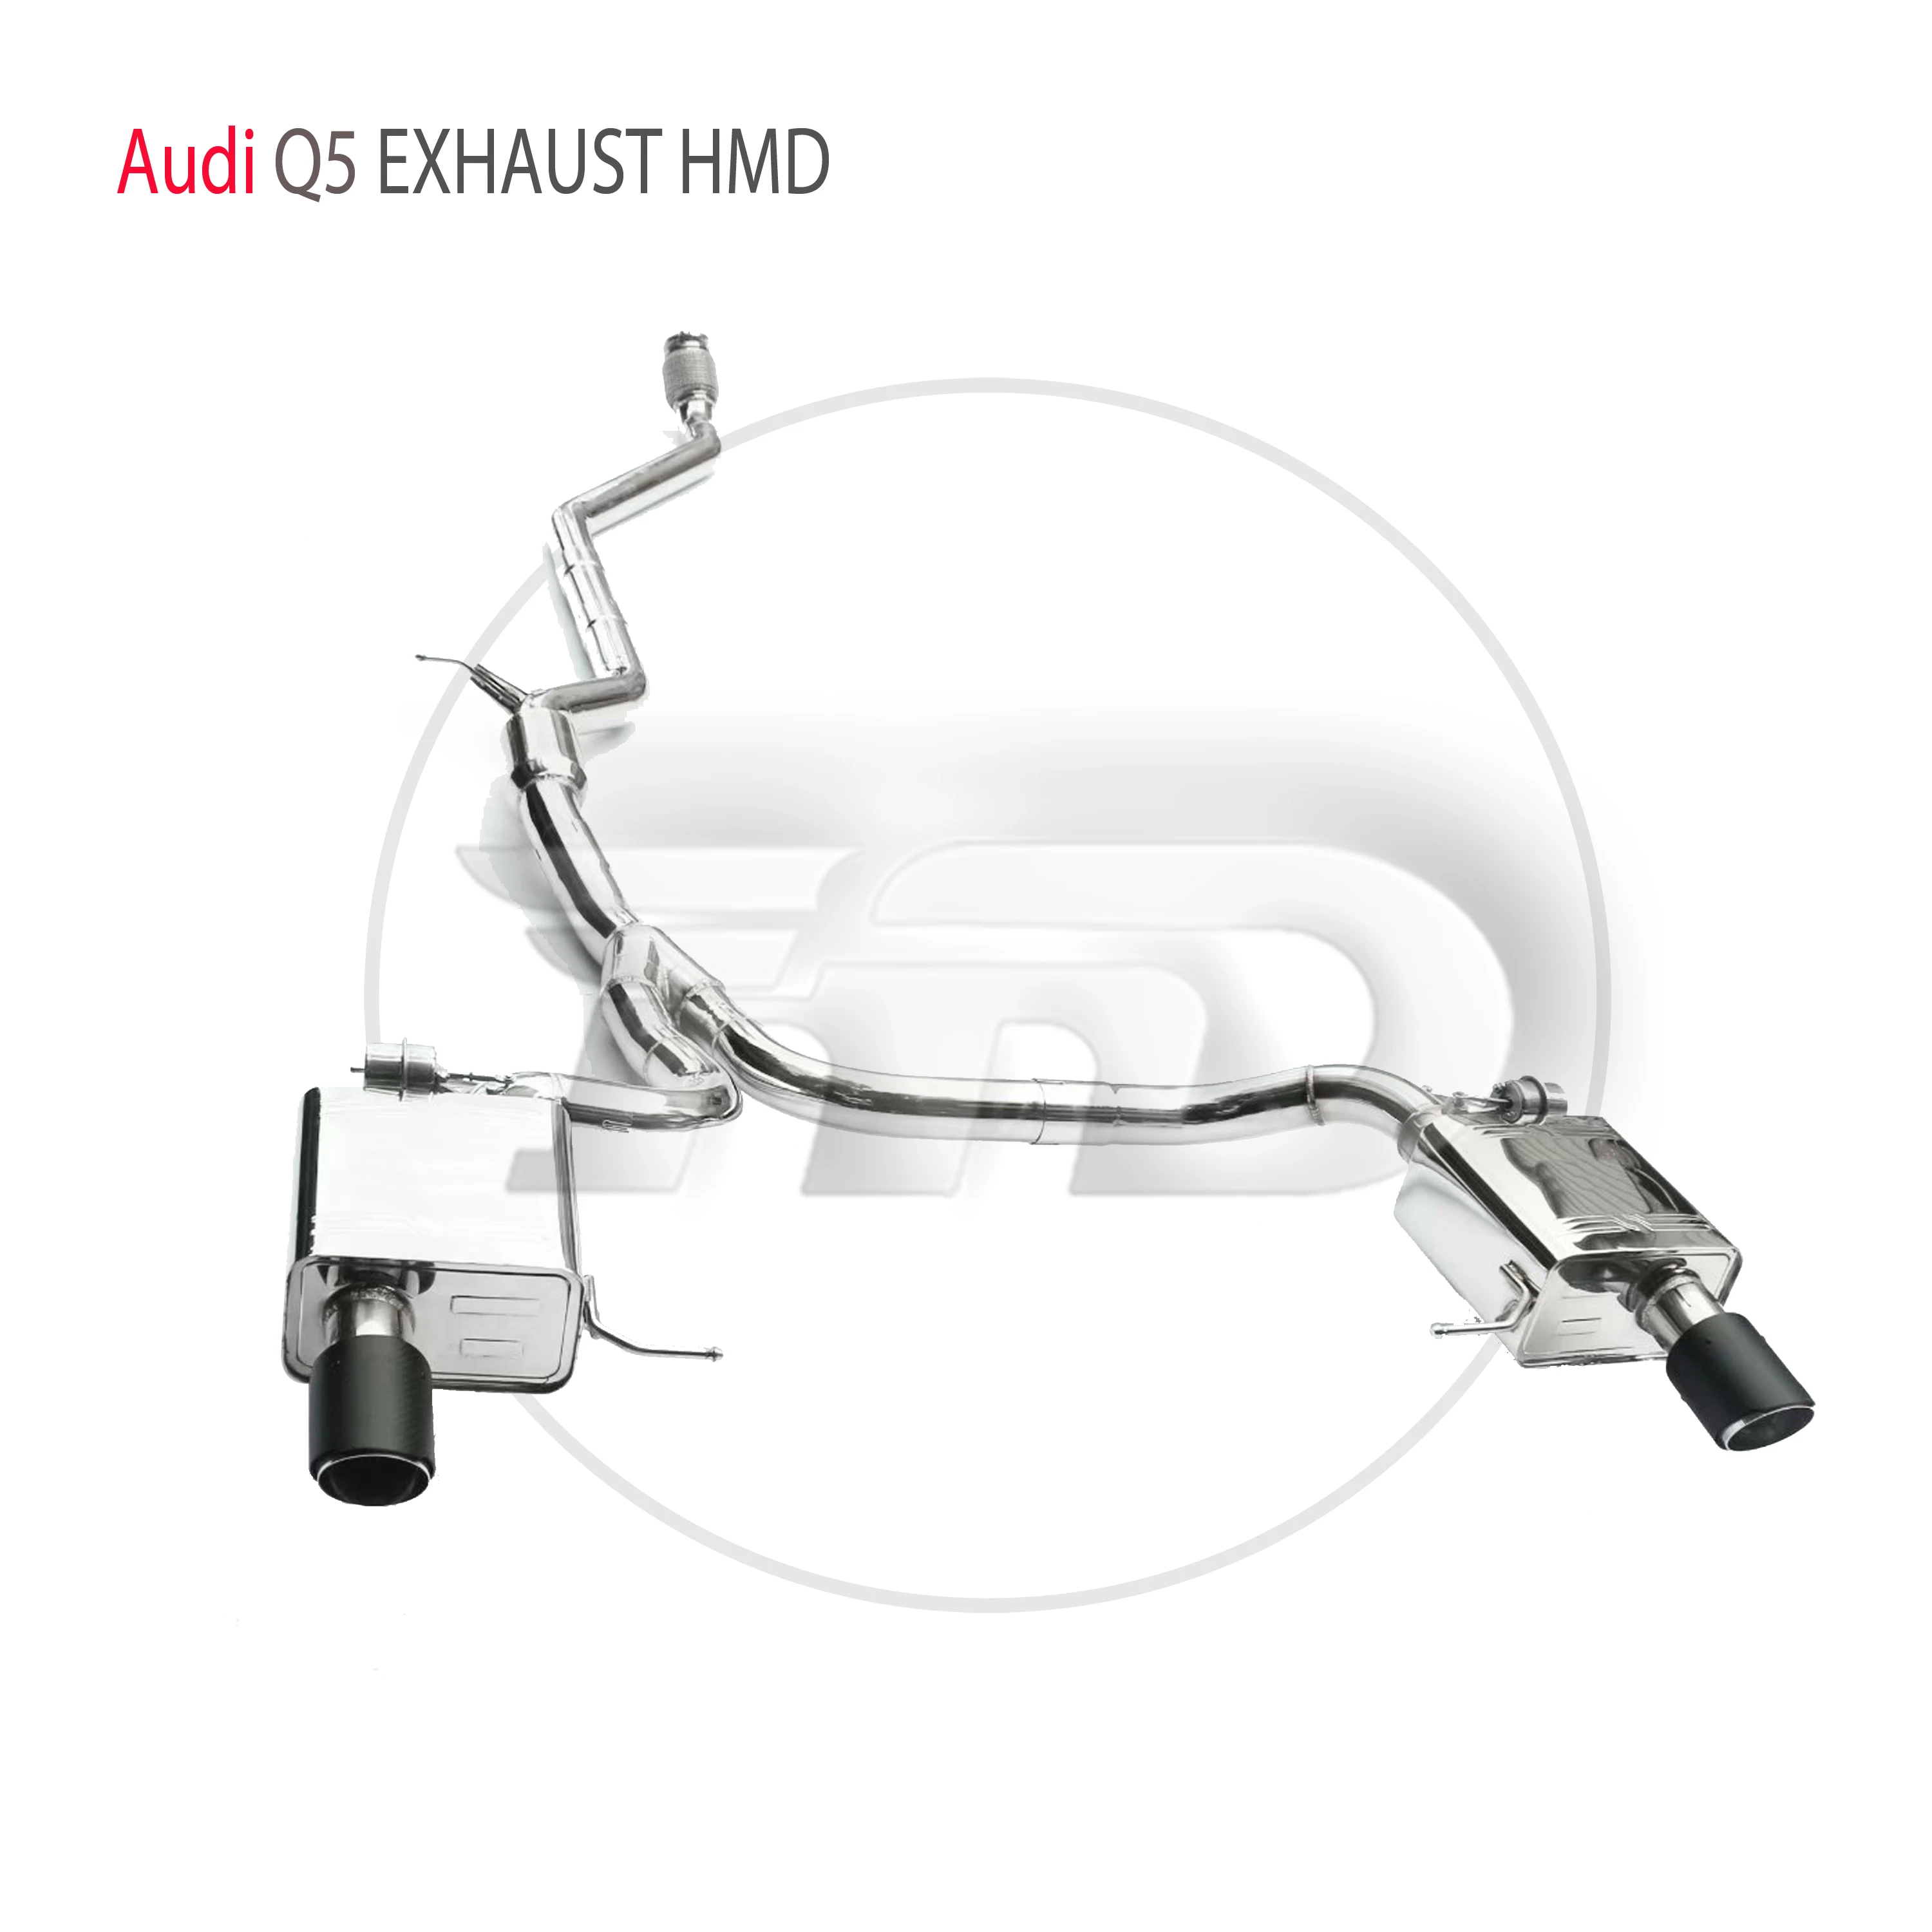 

HMD Stainless Steel Exhaust System Performance Catback is Suitable for Audi Q5 Auto Modification Electronic Valve Muffler